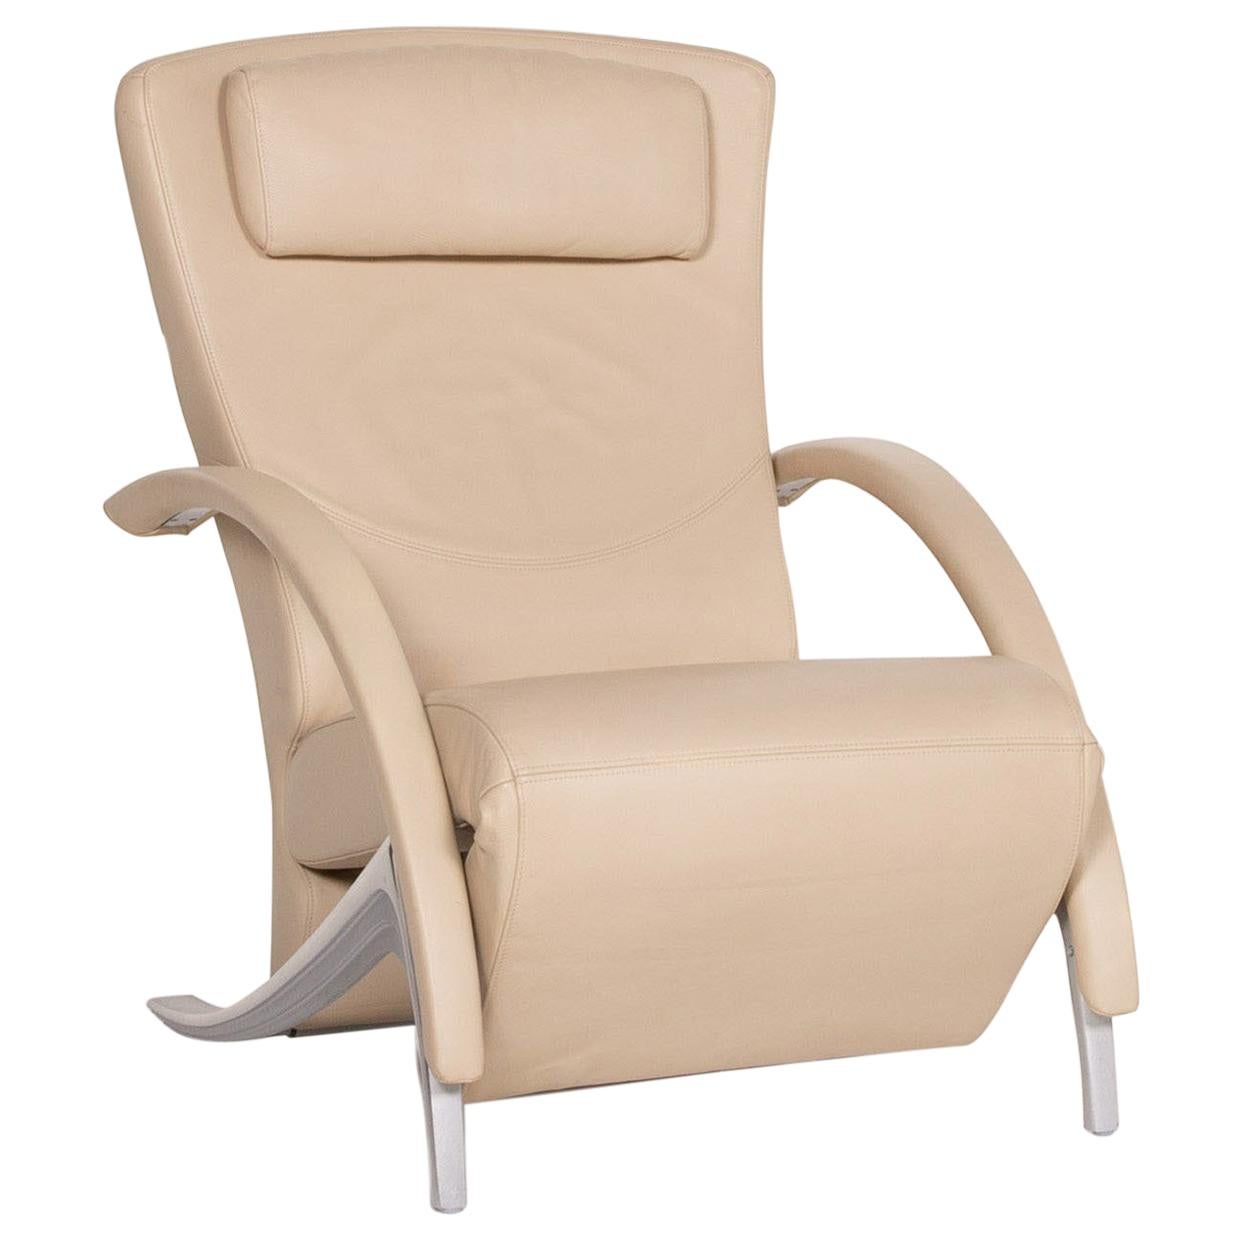 Rolf Benz 3100 Leather Armchair Cream Lounger For Sale